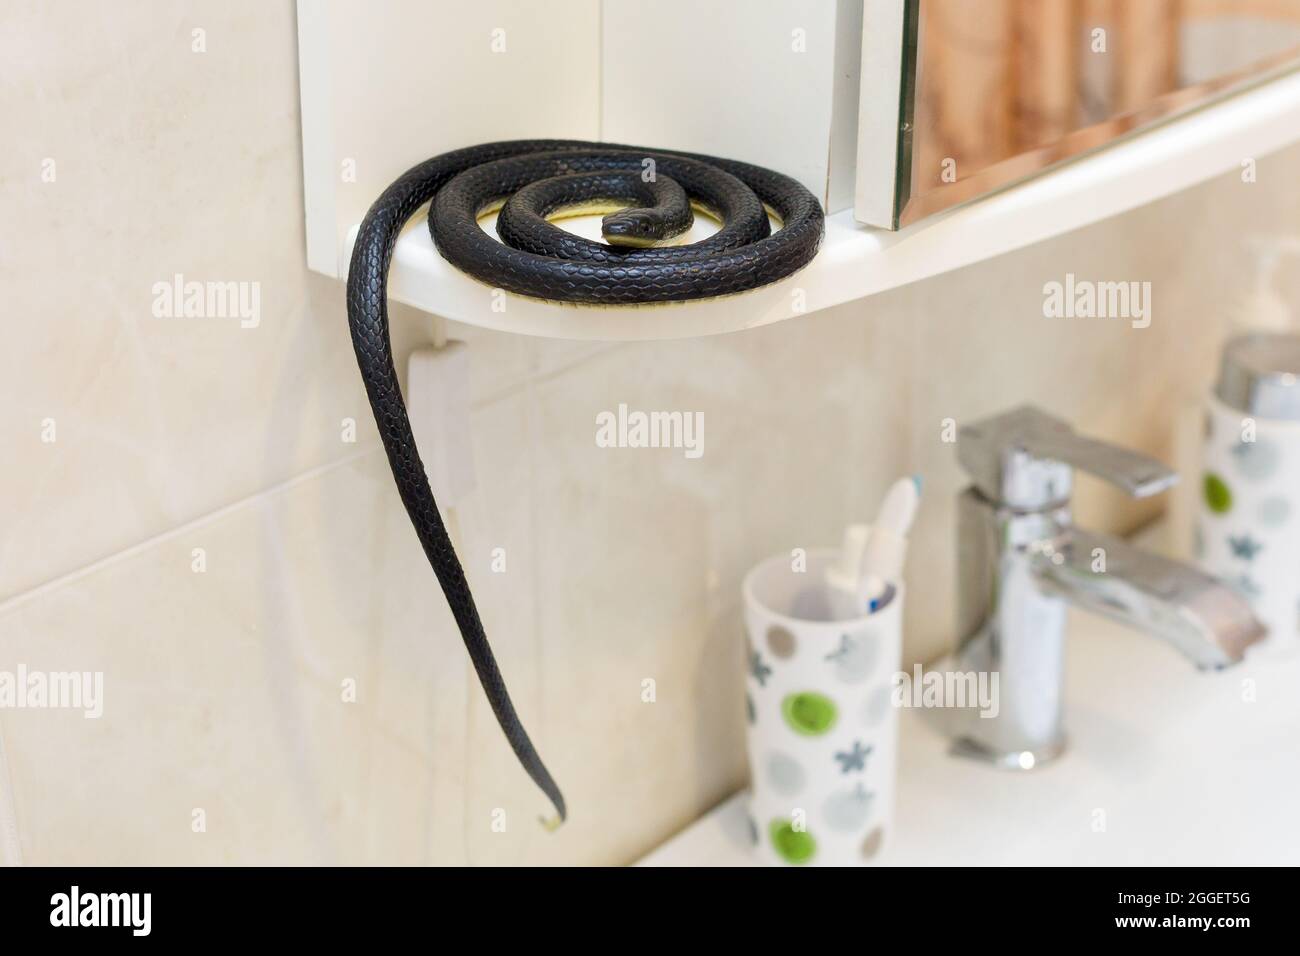 https://c8.alamy.com/comp/2GGET5G/a-dangerous-poisonous-black-snake-in-apartment-in-the-bathroom-curled-up-in-front-of-the-mirror-2GGET5G.jpg